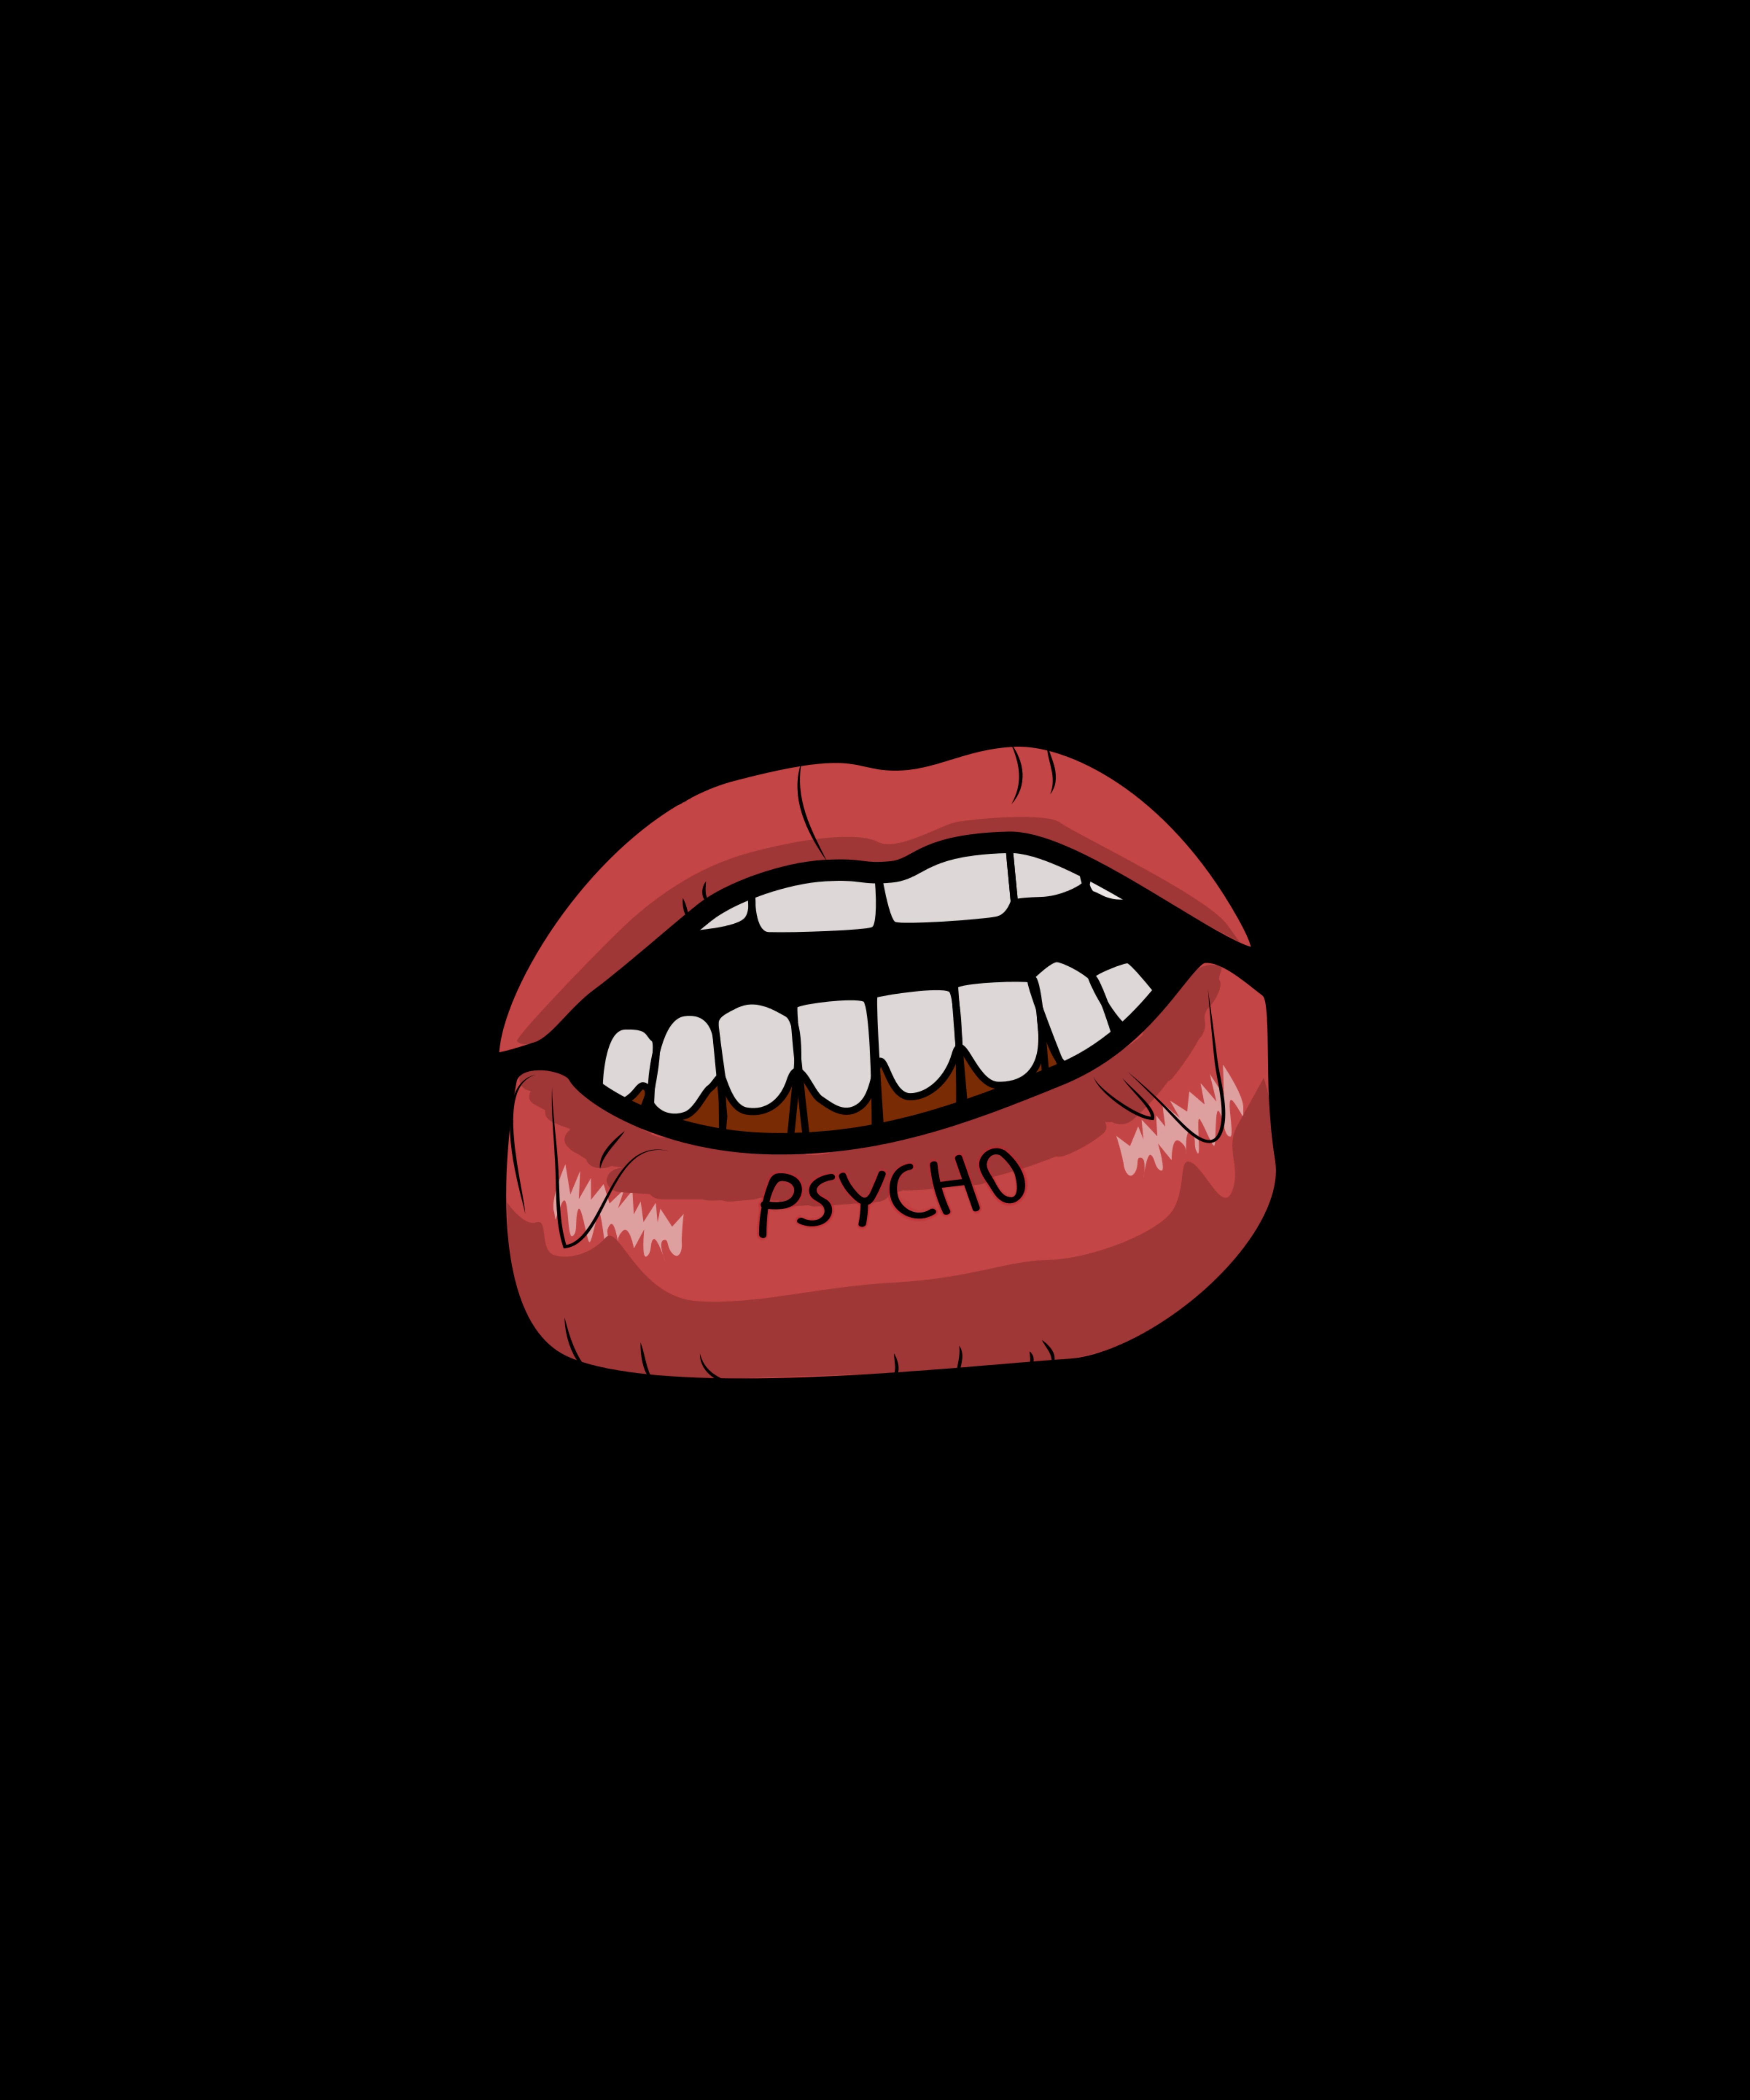 103657 download wallpaper art, vector, inscription, graphics, psycho, lips screensavers and pictures for free